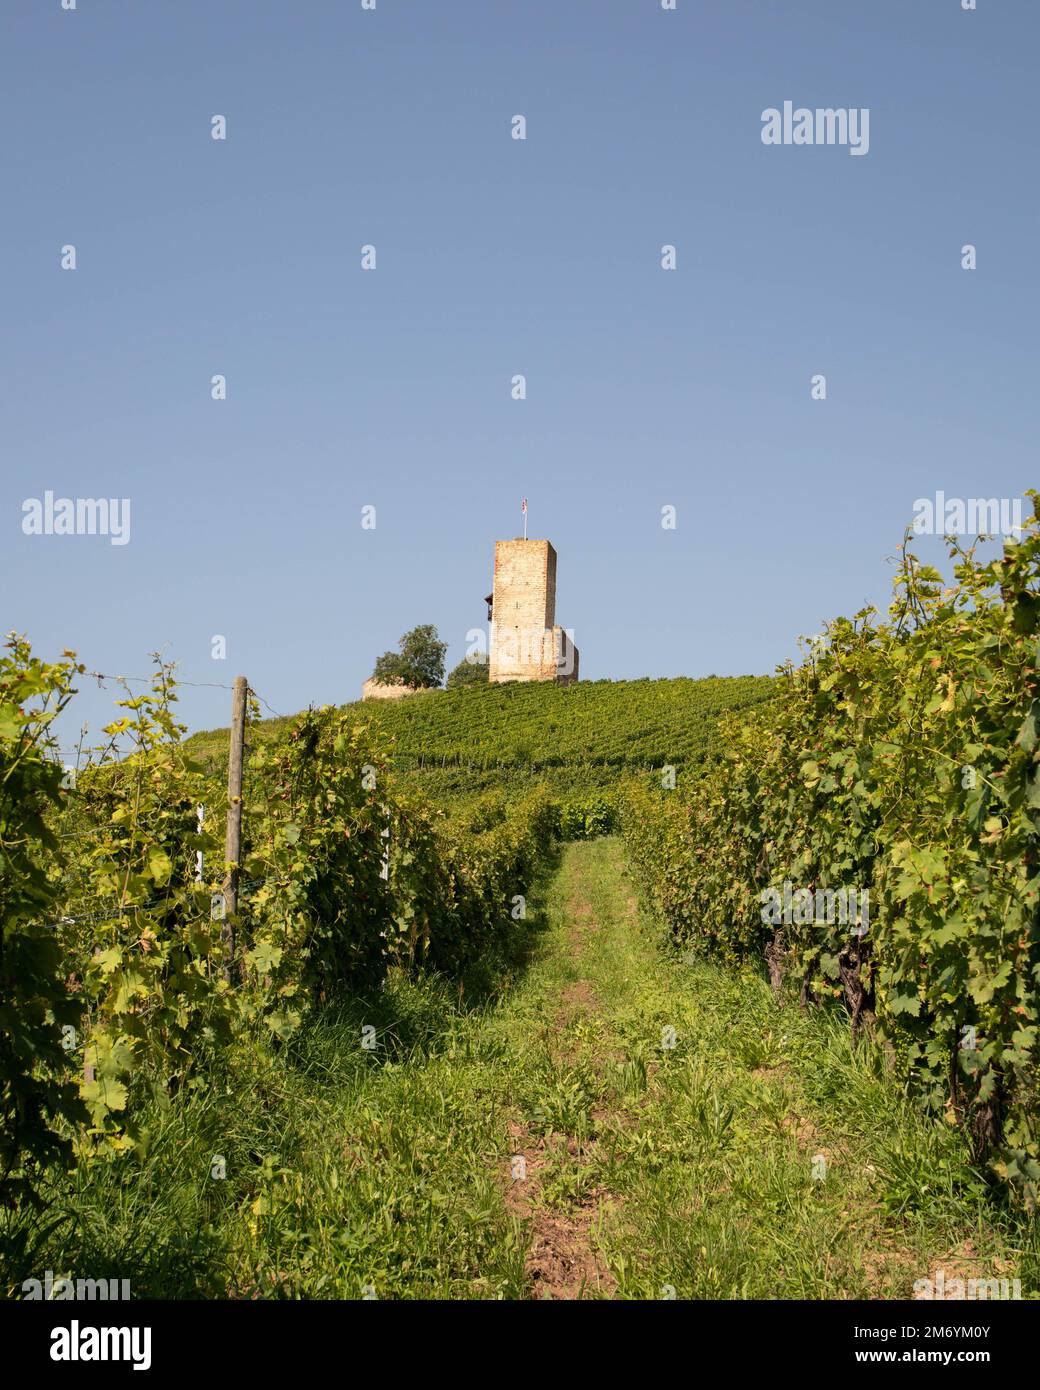 Vineyard taking the sun in Alsace.Wine region in France.Breathtaking landscape with hills filled with vines in golden light. Nice view of the vineyard Stock Photo